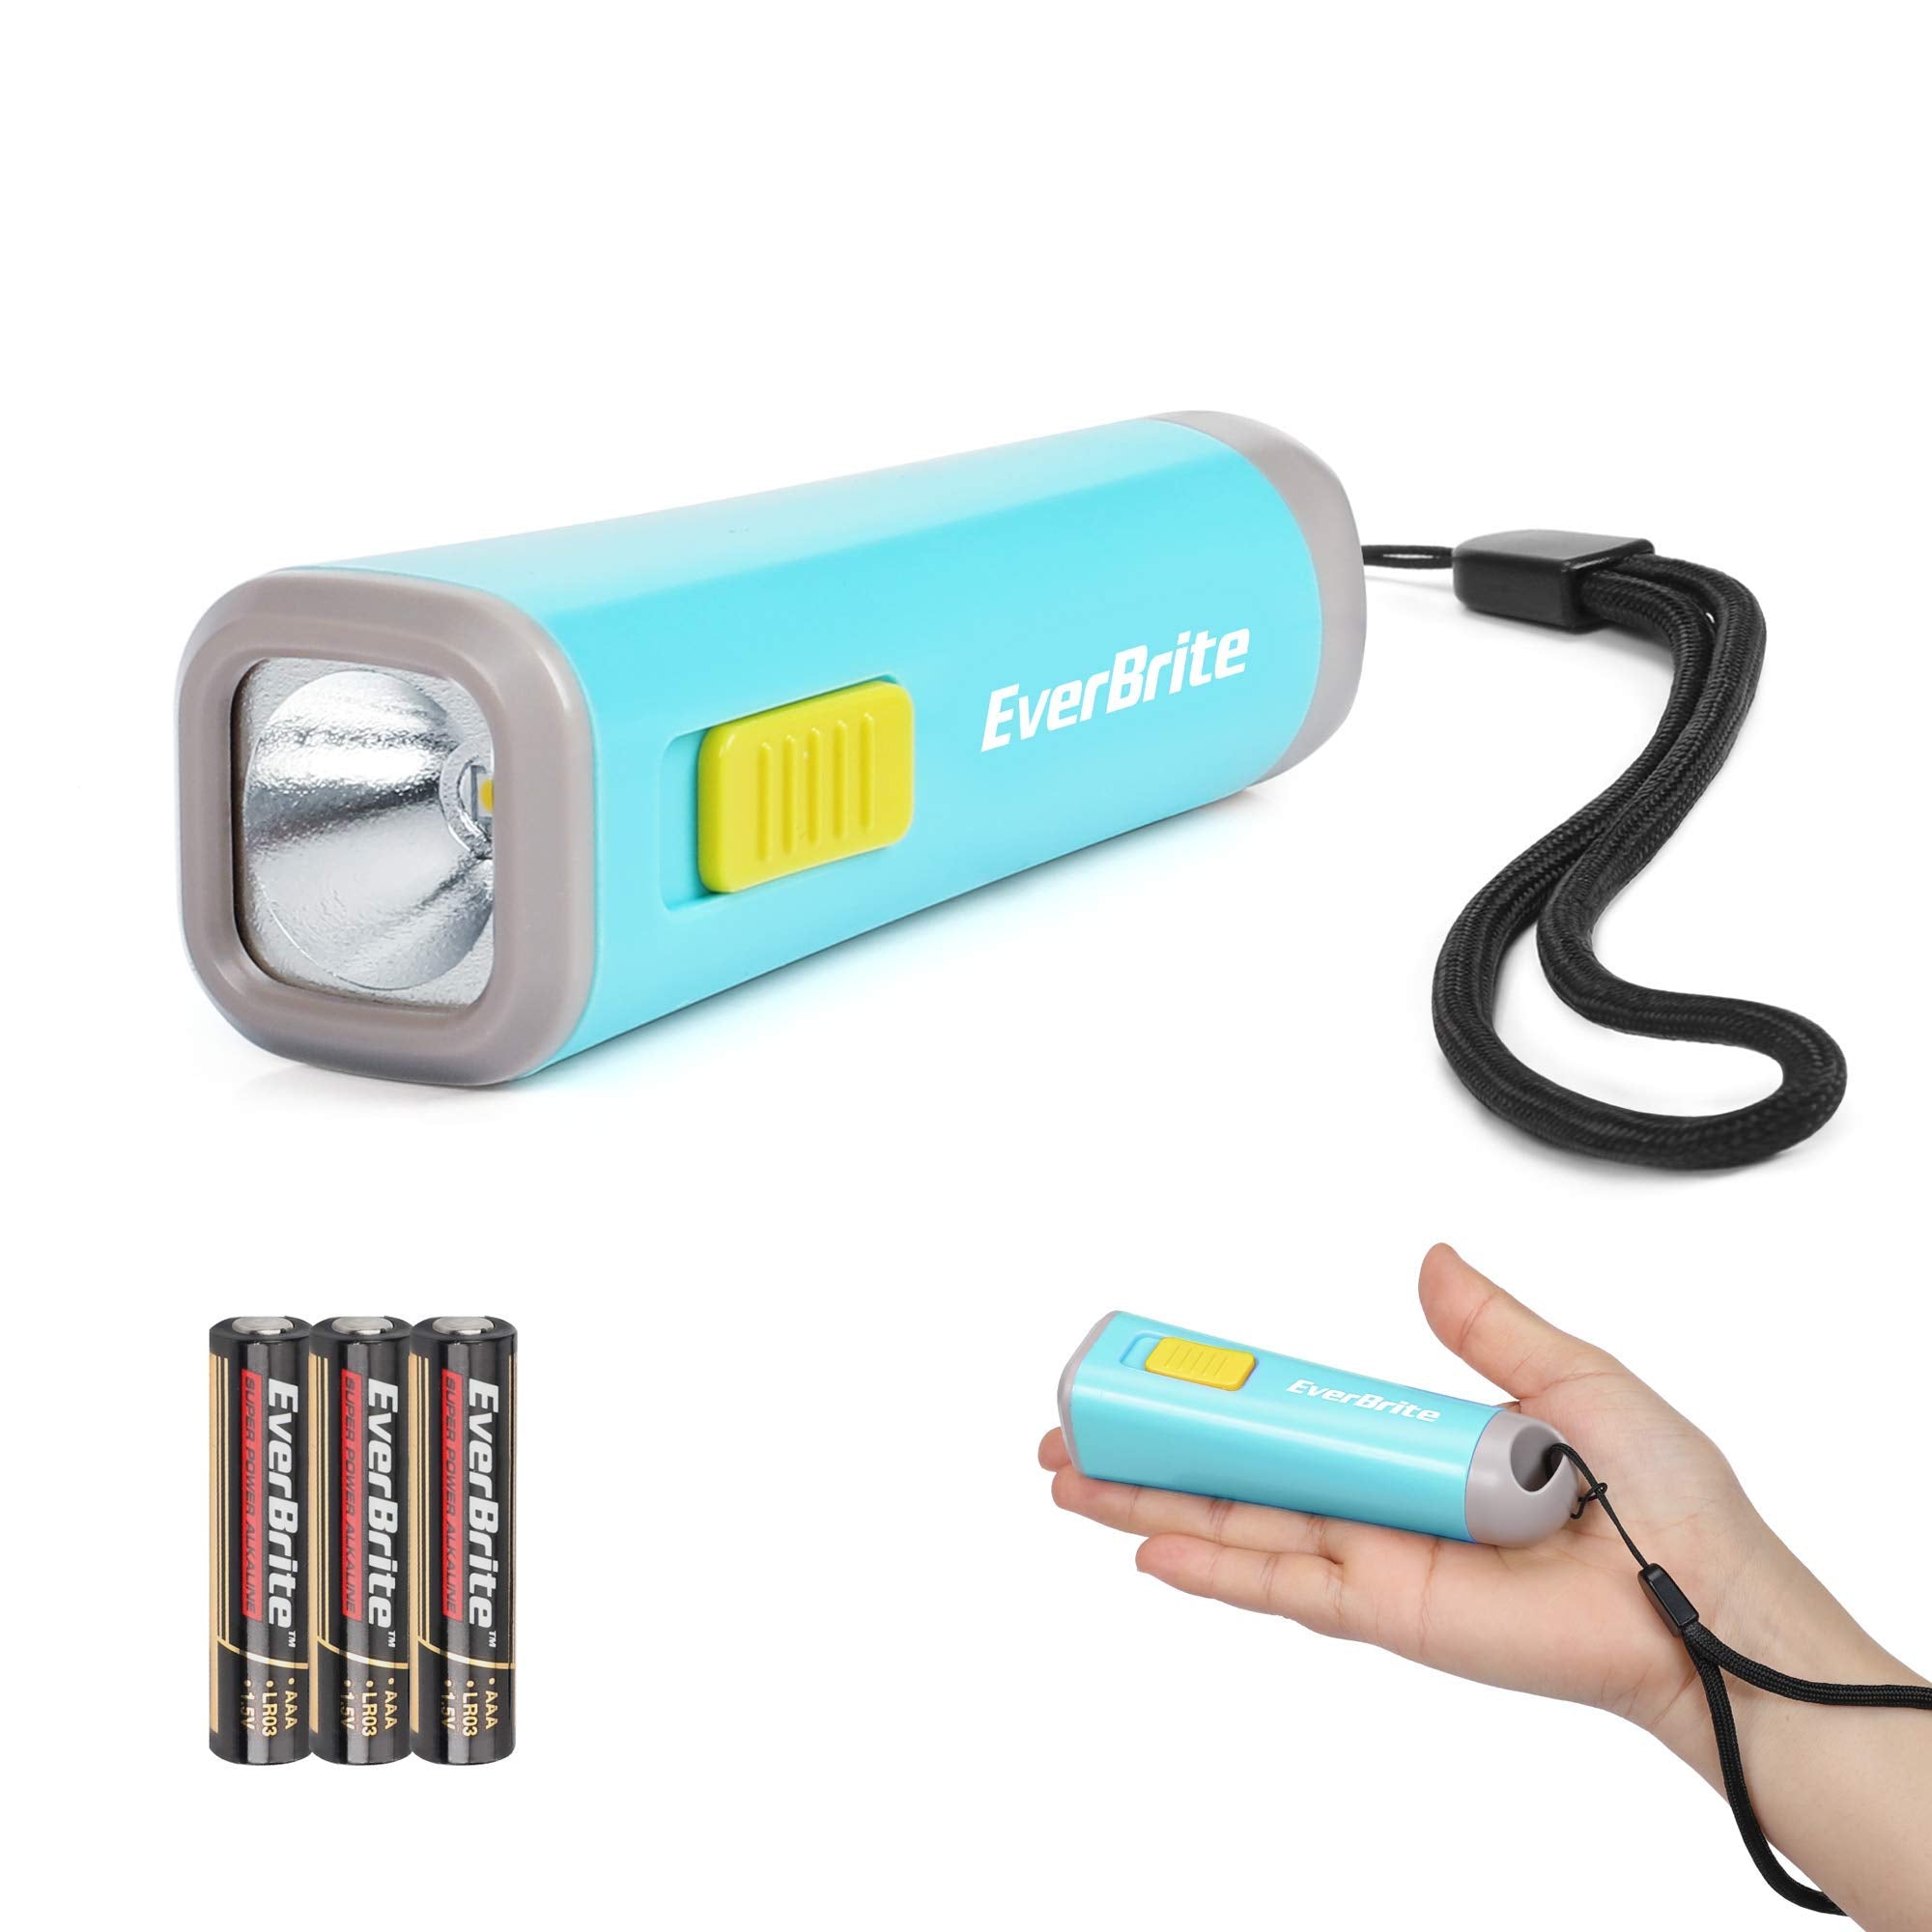 EverBrite Mini LED Kids Flashlight (Blue), Kids Torch Light Weight (46g) with Yellow Light, Ideal for Reading, Camping, Walking, Asking for Help, 3 AAA Batteries Included, Gift for Child